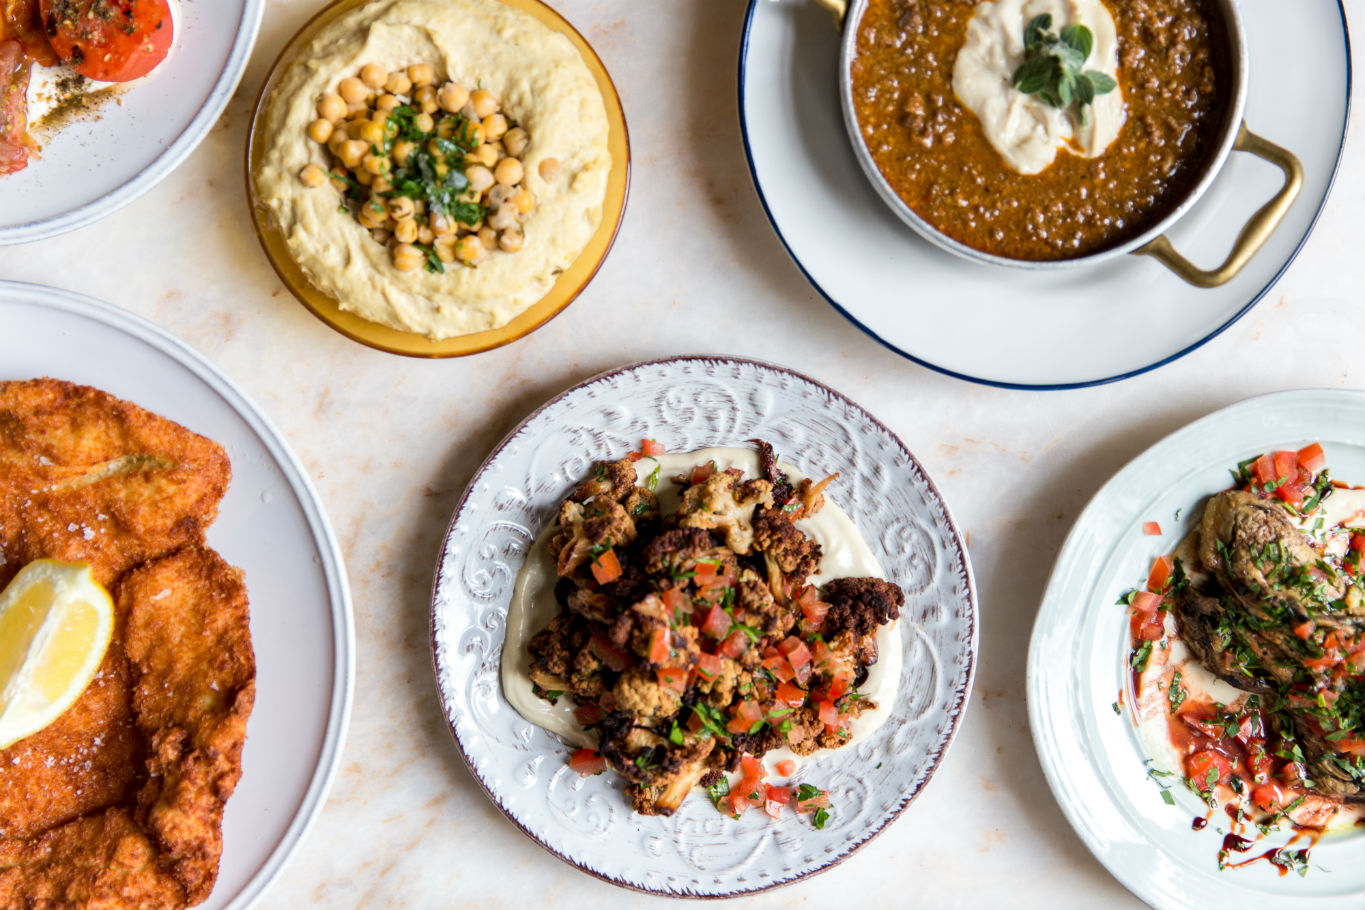 Humus and other plates at Café Hampstead